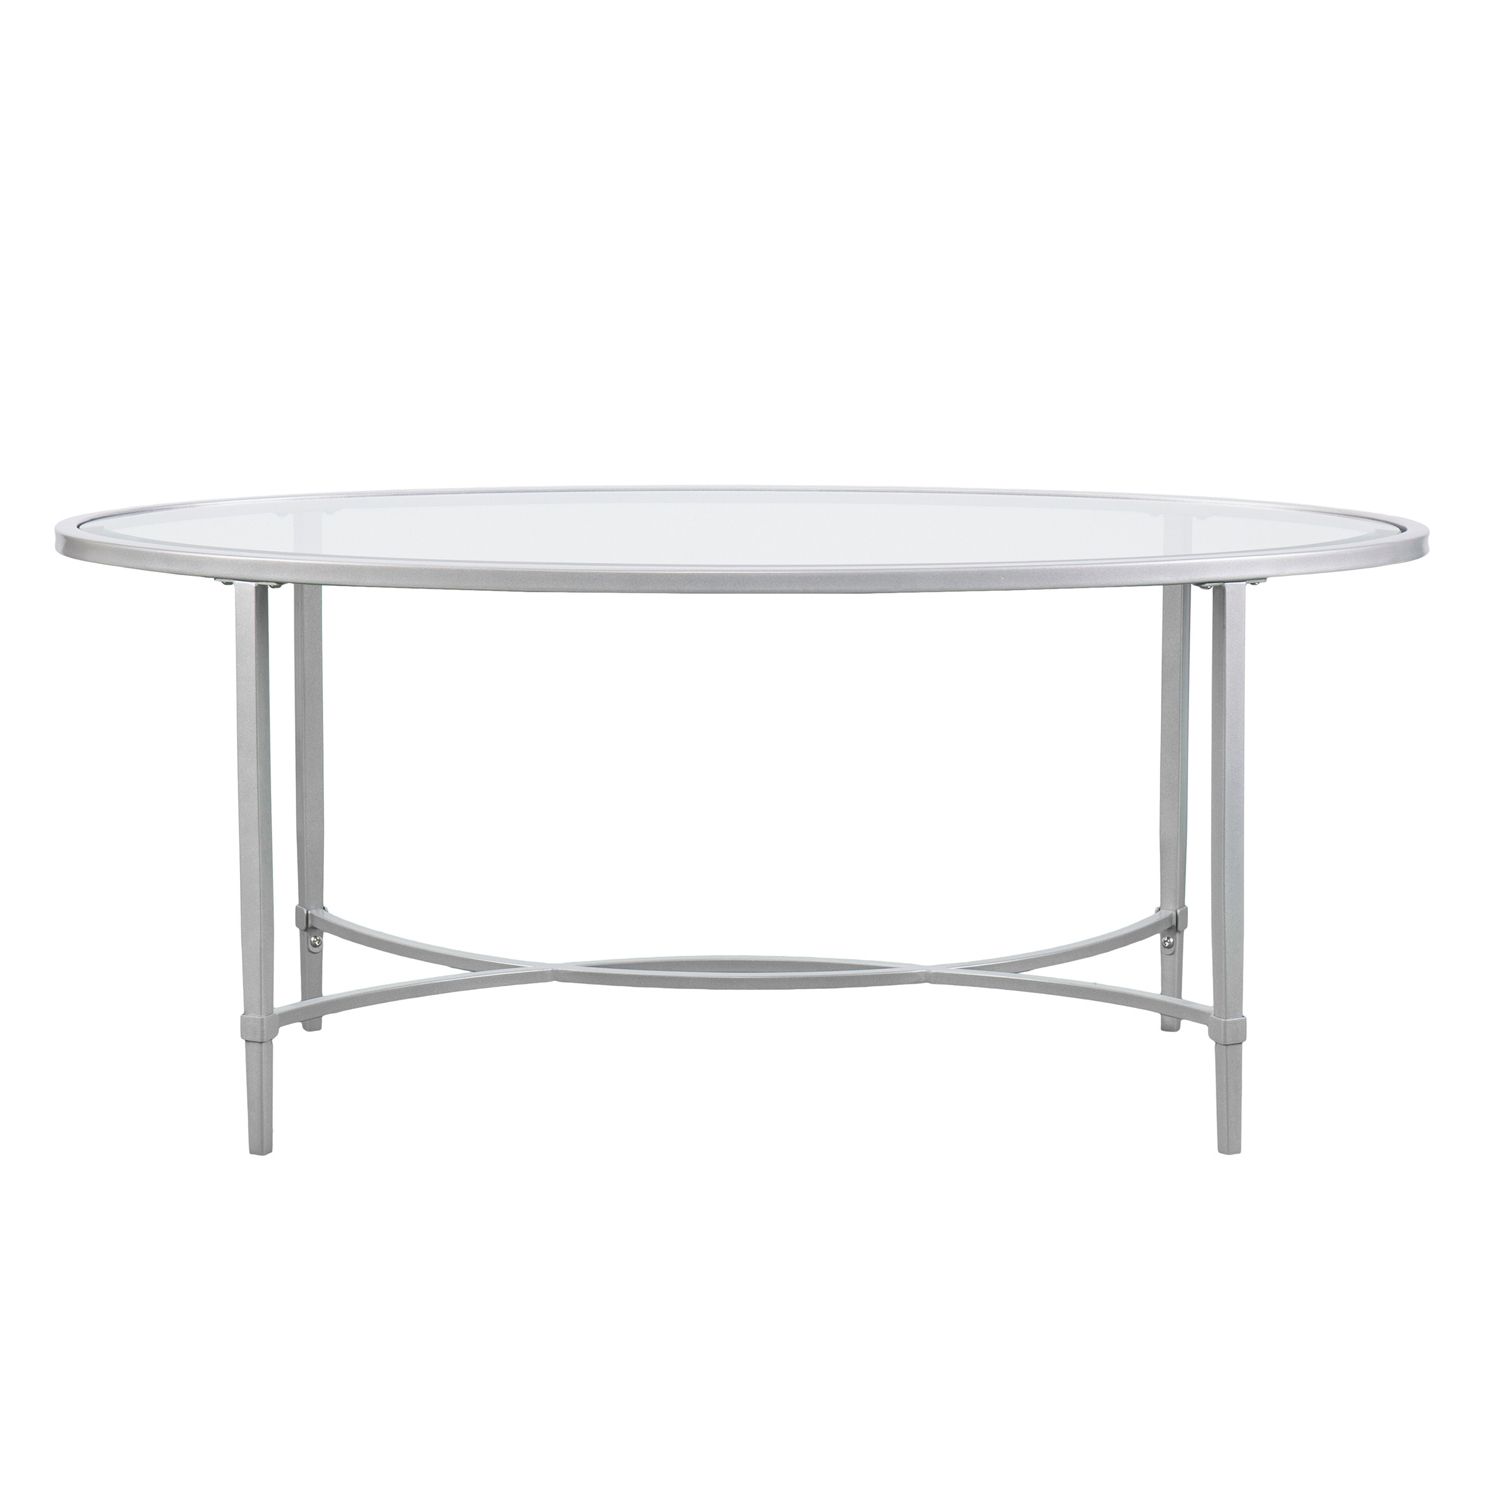 Trendy Metallic Silver Cocktail Tables In Hillcrest Silver Metal Oval Coffee Table – Pier (View 18 of 20)